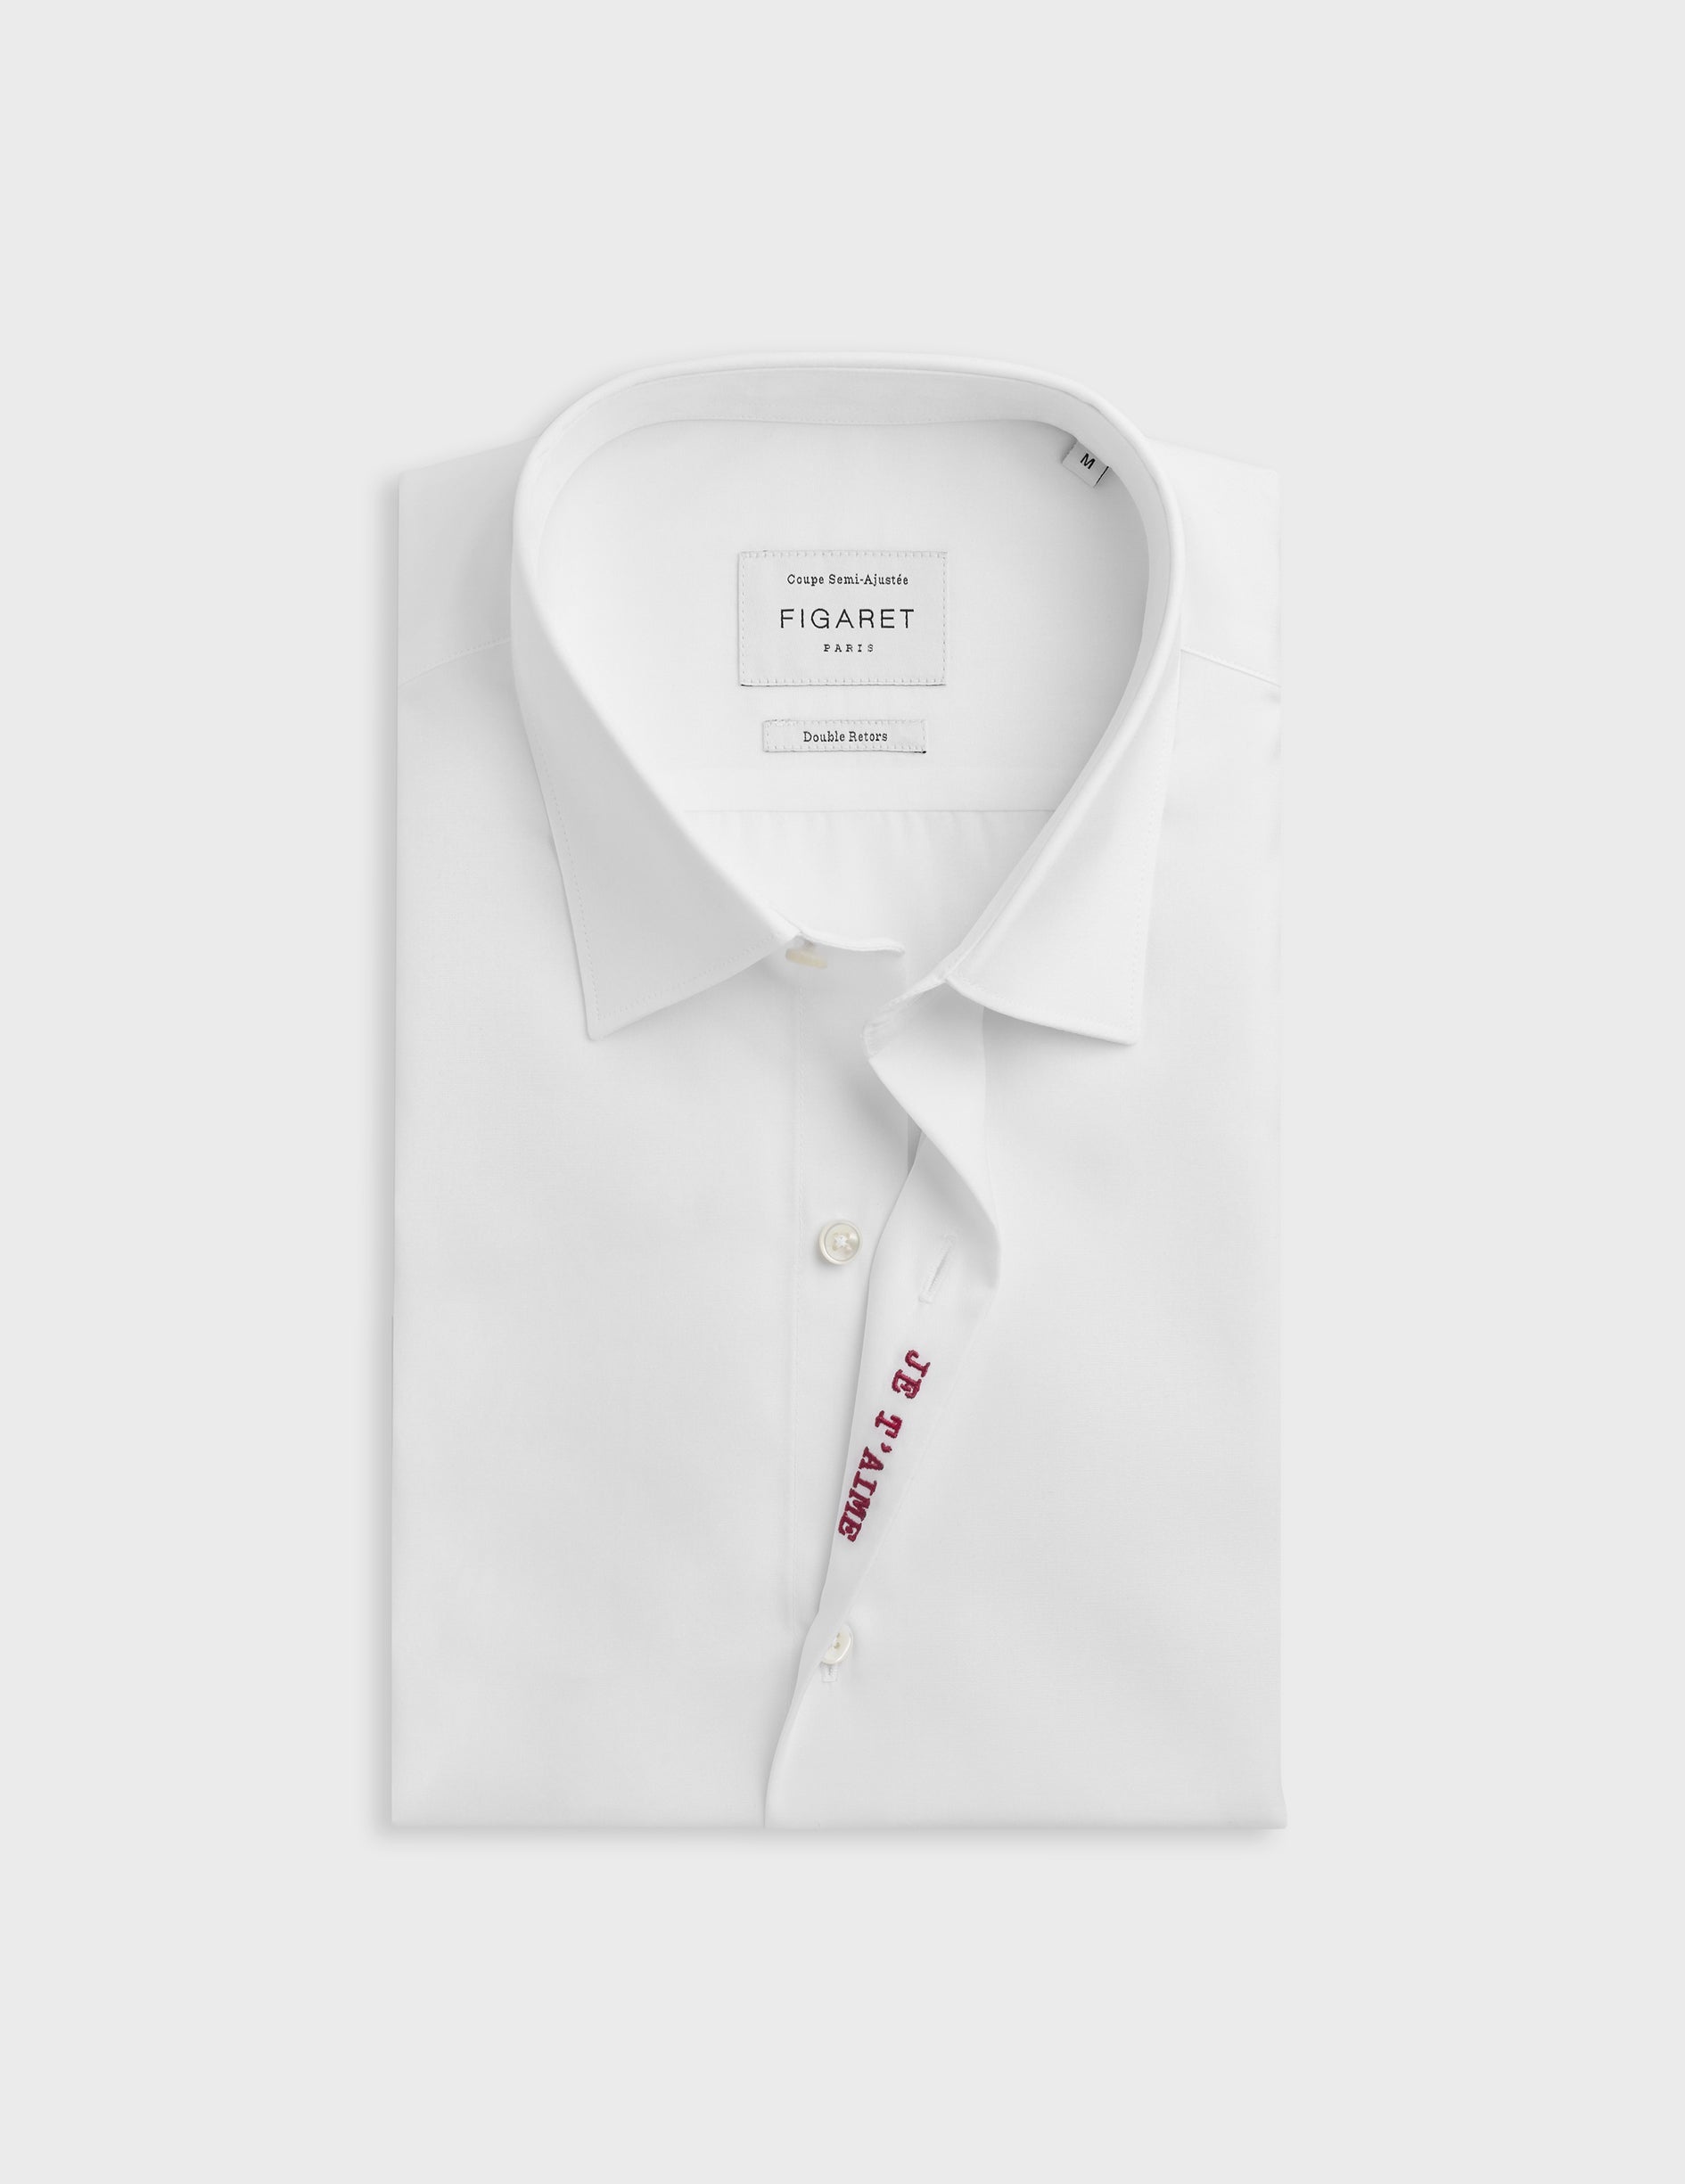 "Je t'aime" white shirt embroidered in red - Poplin - Figaret Collar